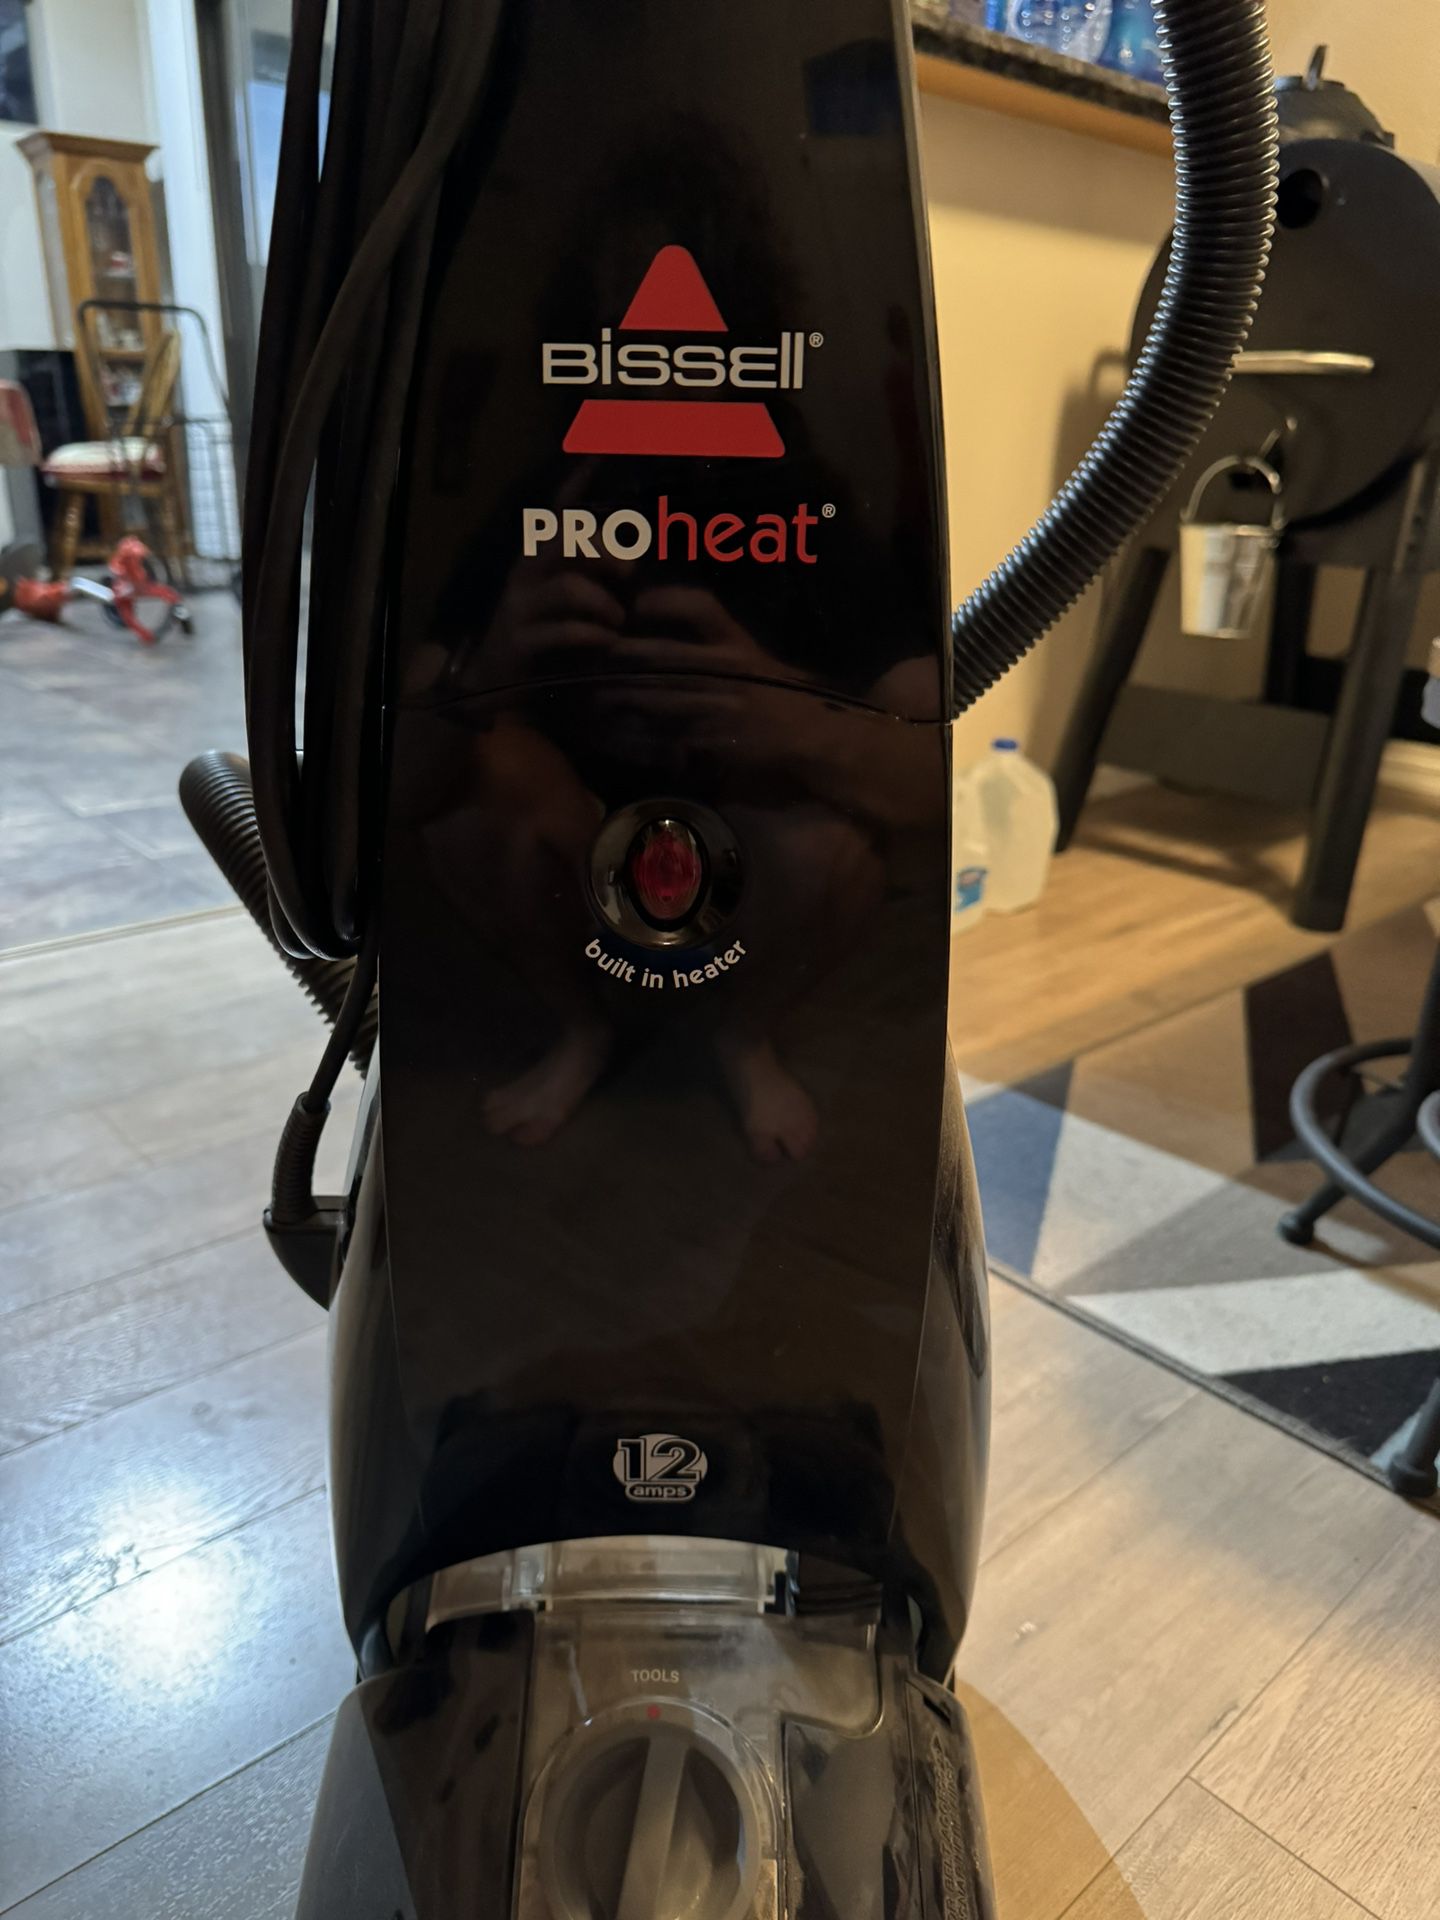 Bissell ProHeat upright Carpet Cleaner